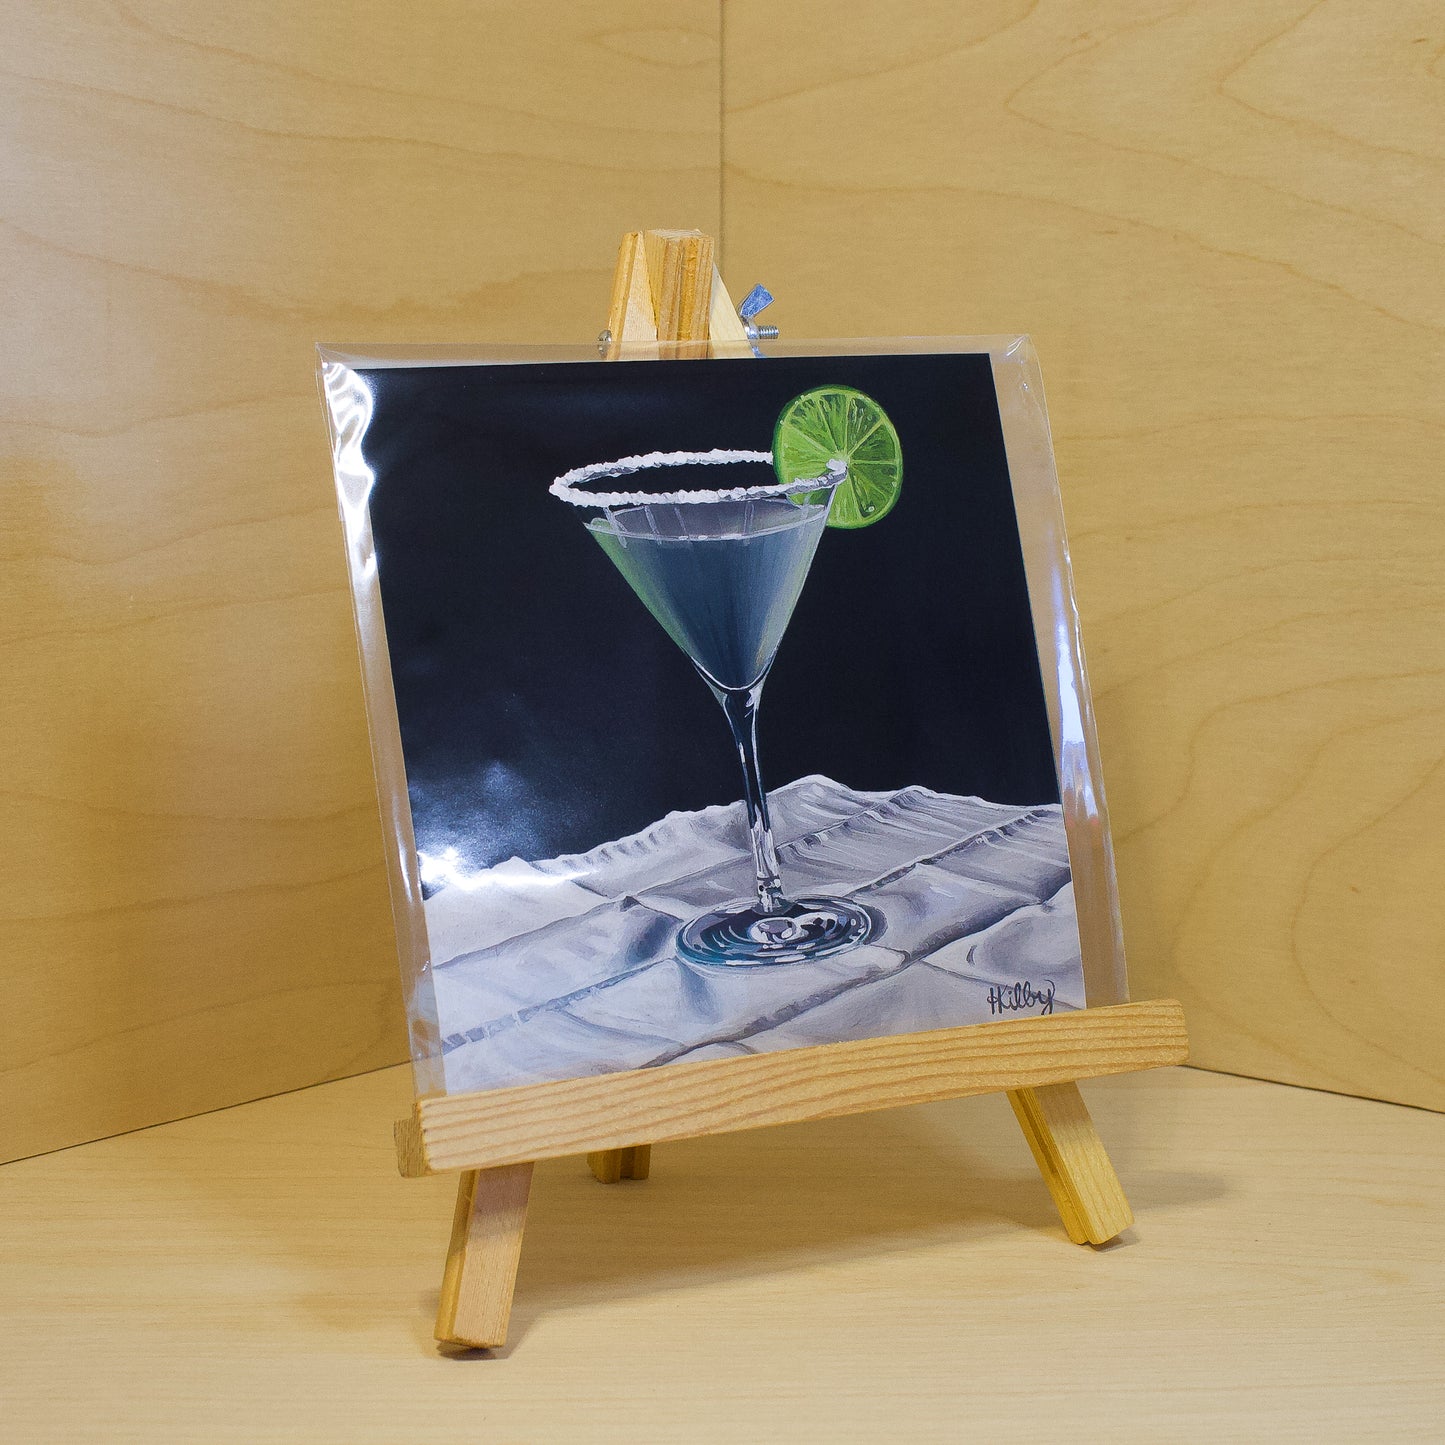 A 6x6" fine art print of the original acrylic painting "Margarita" by Hannah Kilby from Hannah Michelle Studios. Displayed in a protective plastic sleeve on a small, wooden easel.